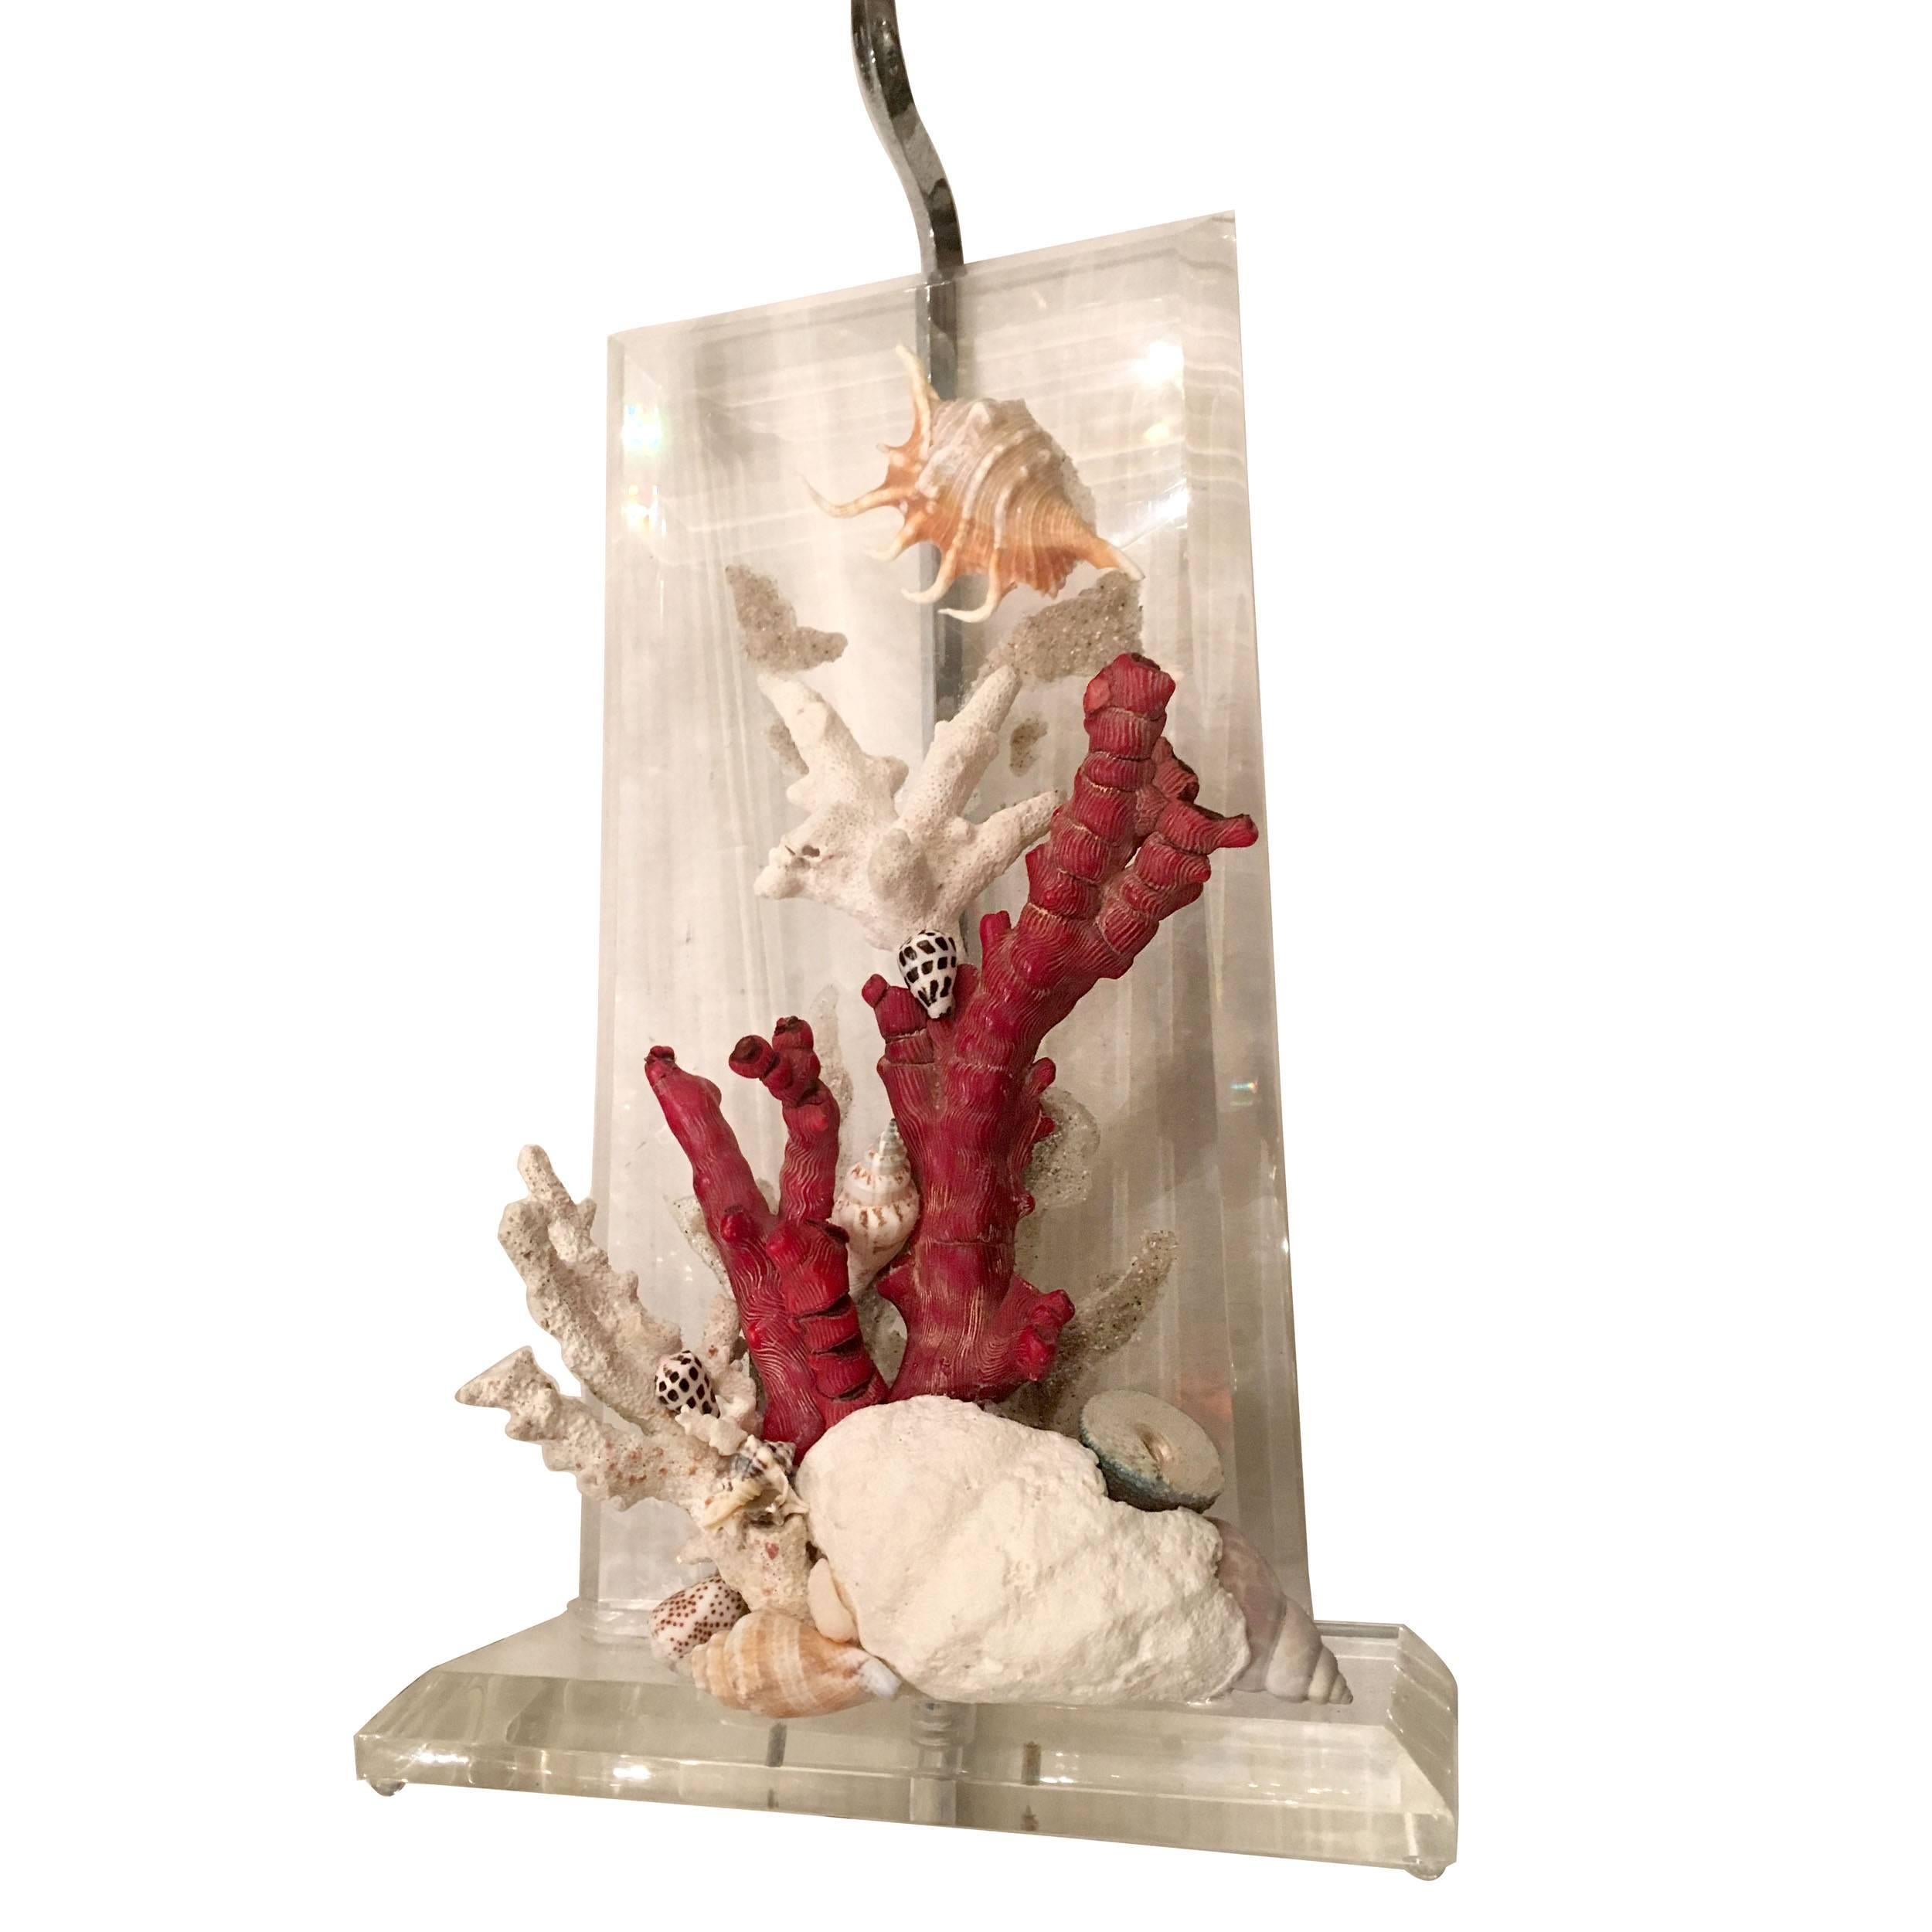 A pair of circa 1950s Lucite table lamps with natural coral and seashells on body.
Measures: 16